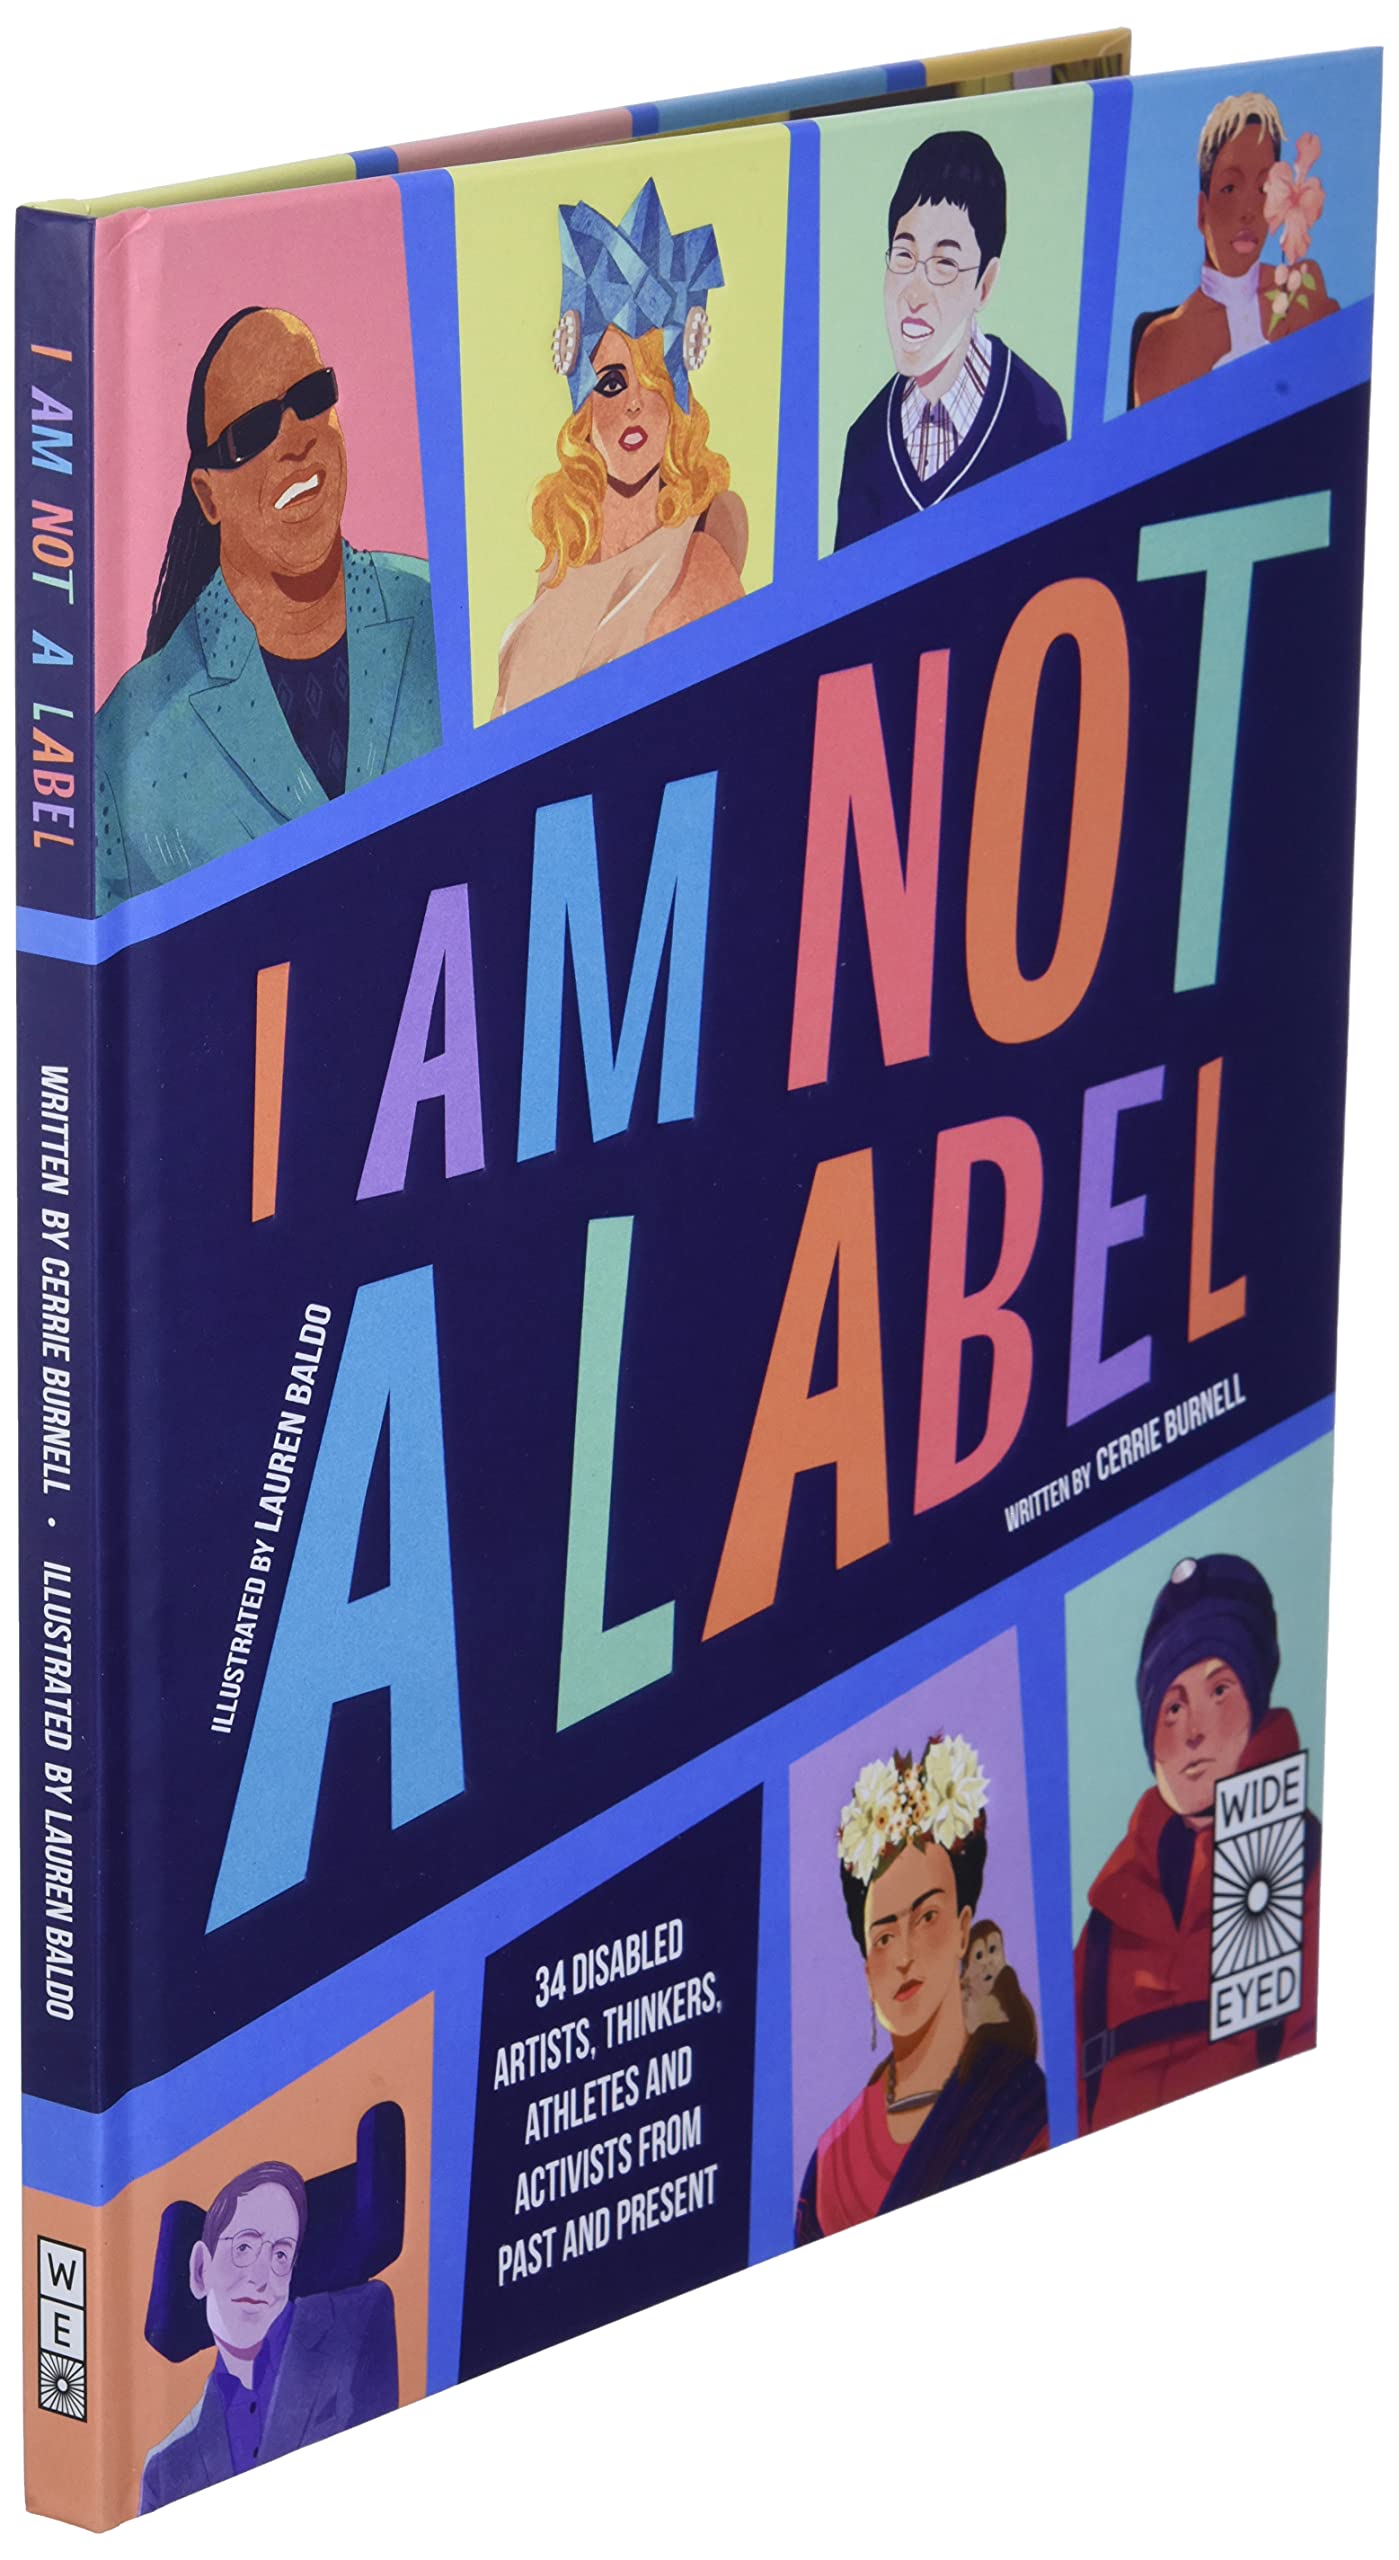 A side view of the outside of the book I am not a Lable by Carrie Burnell featuring stylised illustrations of portraits of famous disabled people